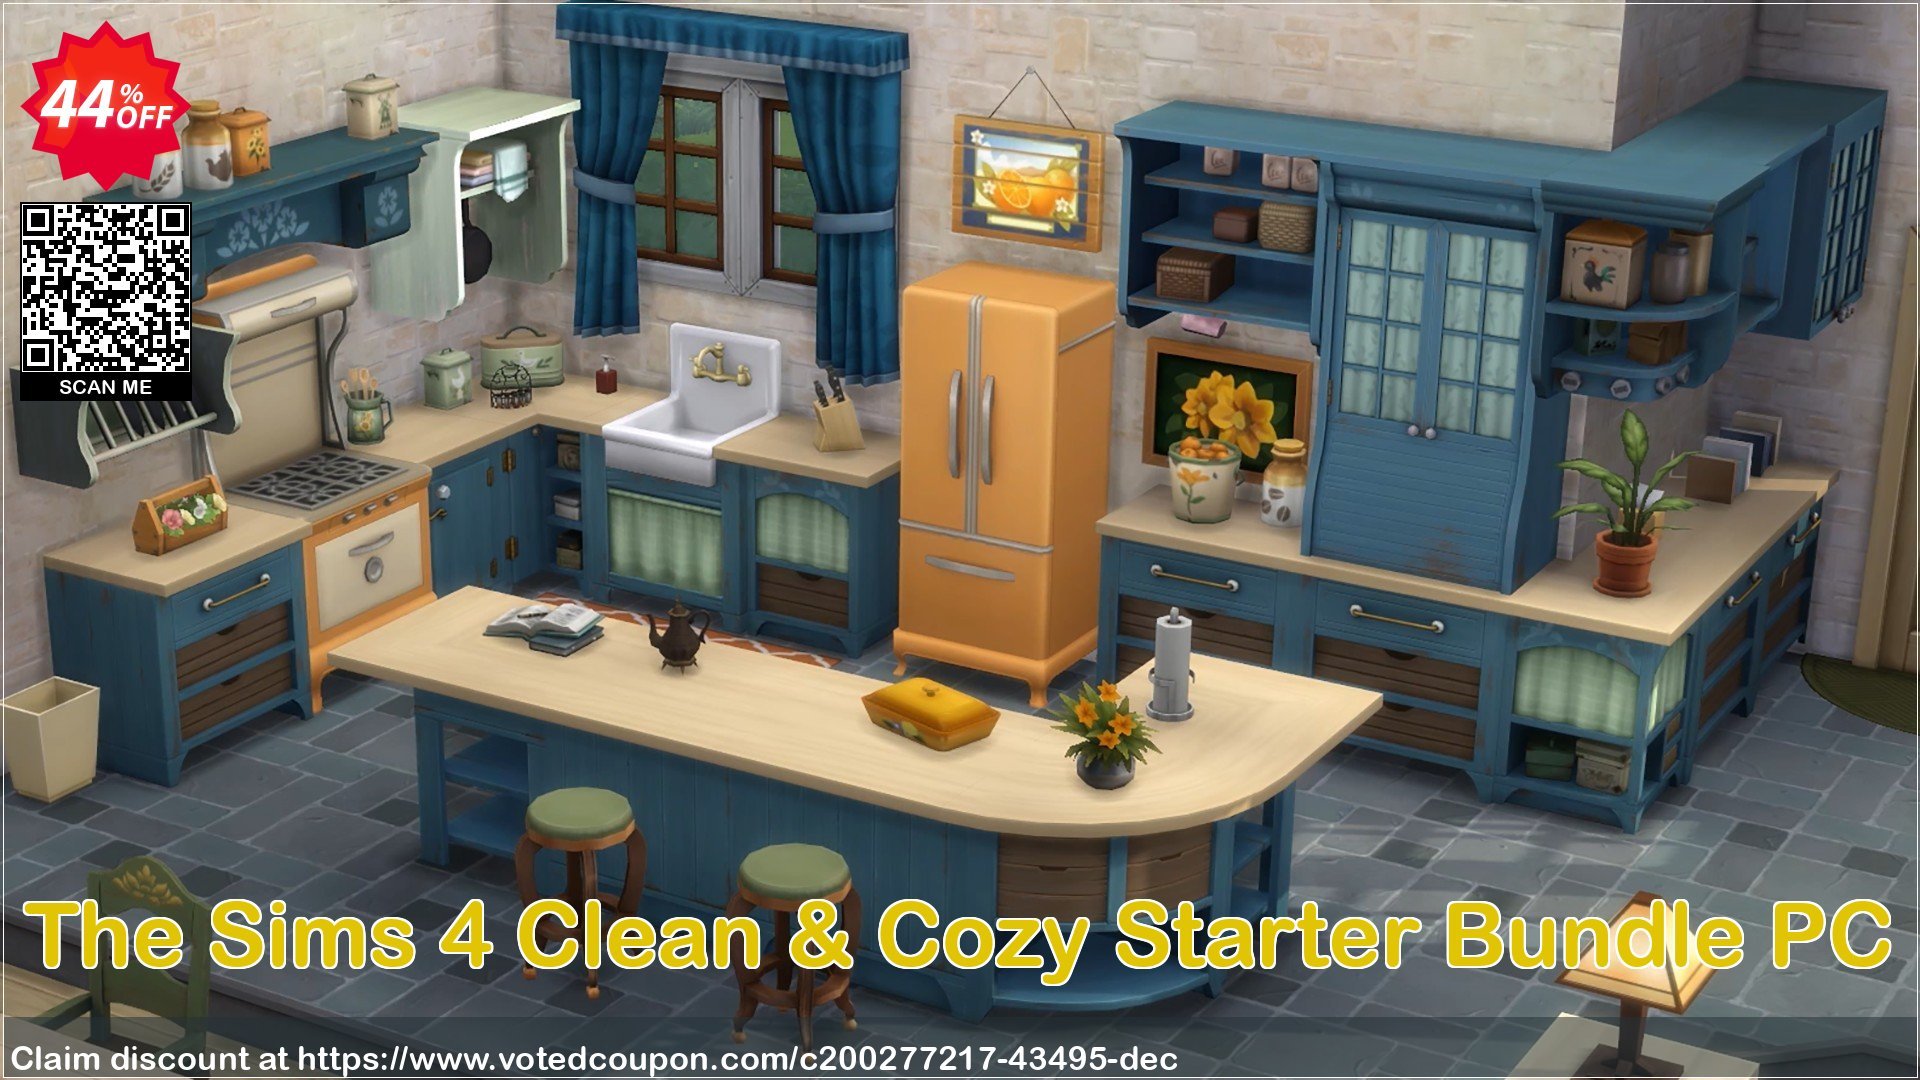 The Sims 4 Clean & Cozy Starter Bundle PC Coupon Code May 2024, 44% OFF - VotedCoupon